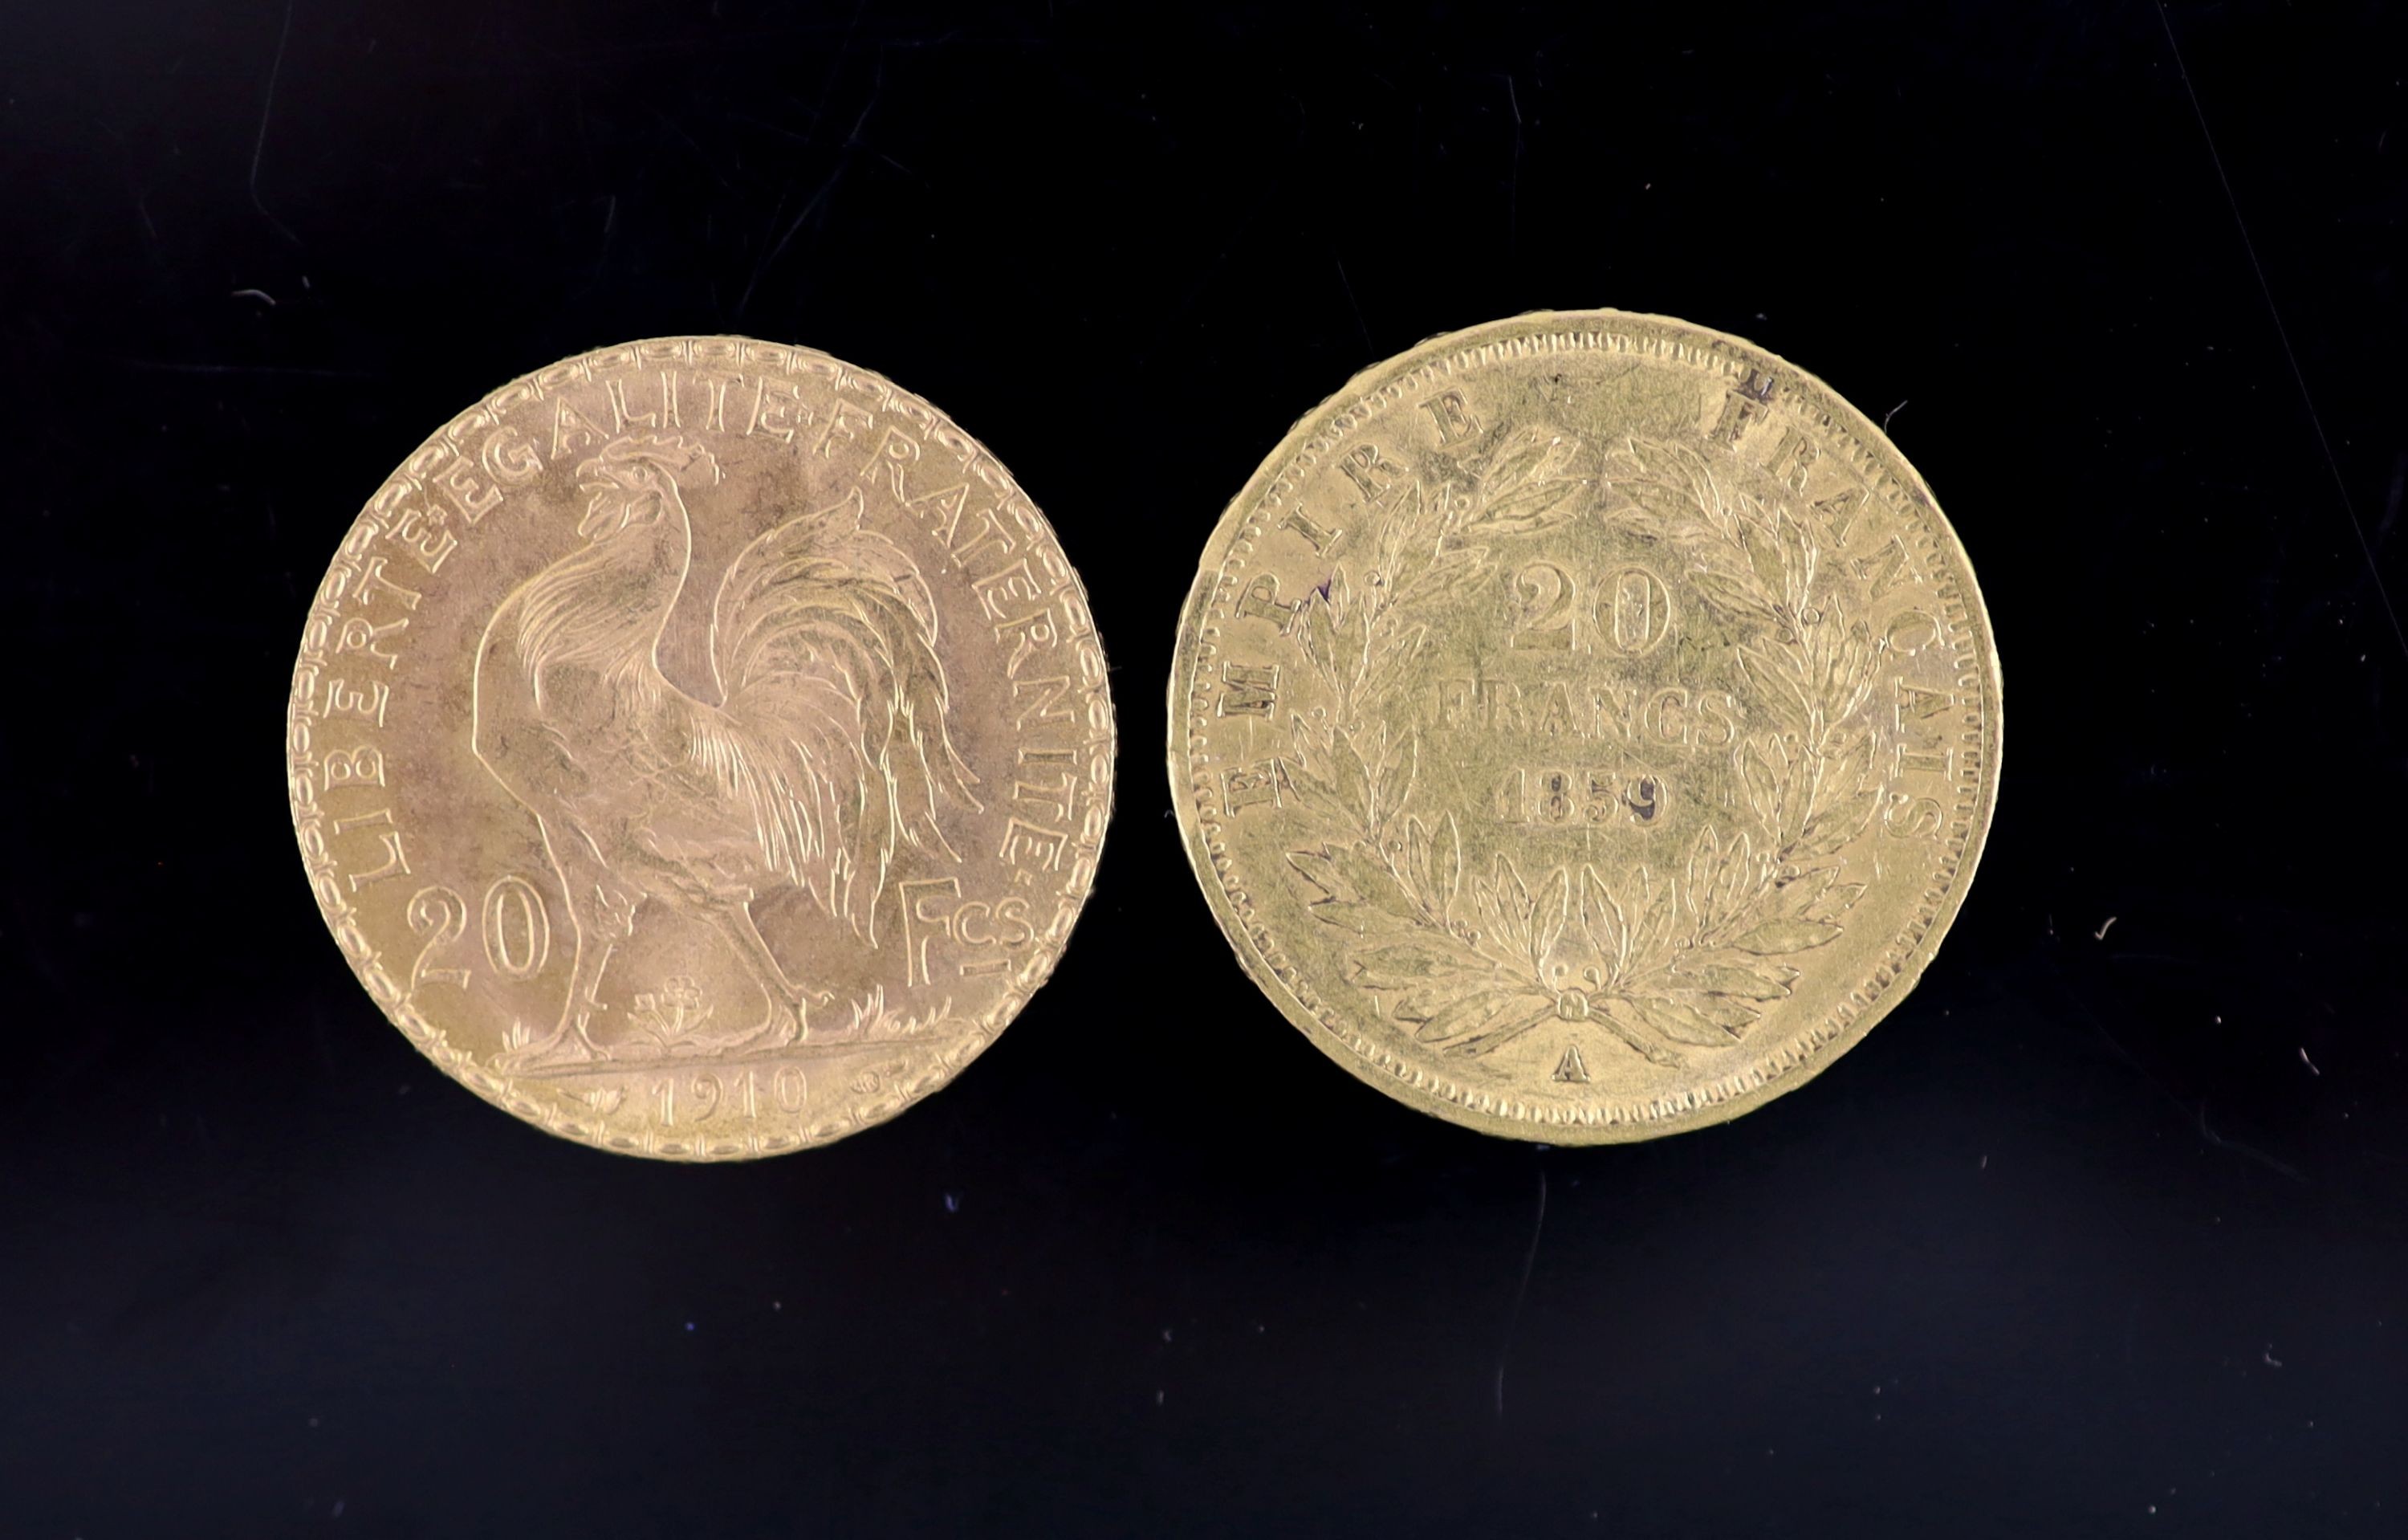 France coins, two gold 20 Francs, Napoleon III 1859A, edge nicks otherwise GVF, and Marianne Rooster 1910, AEF